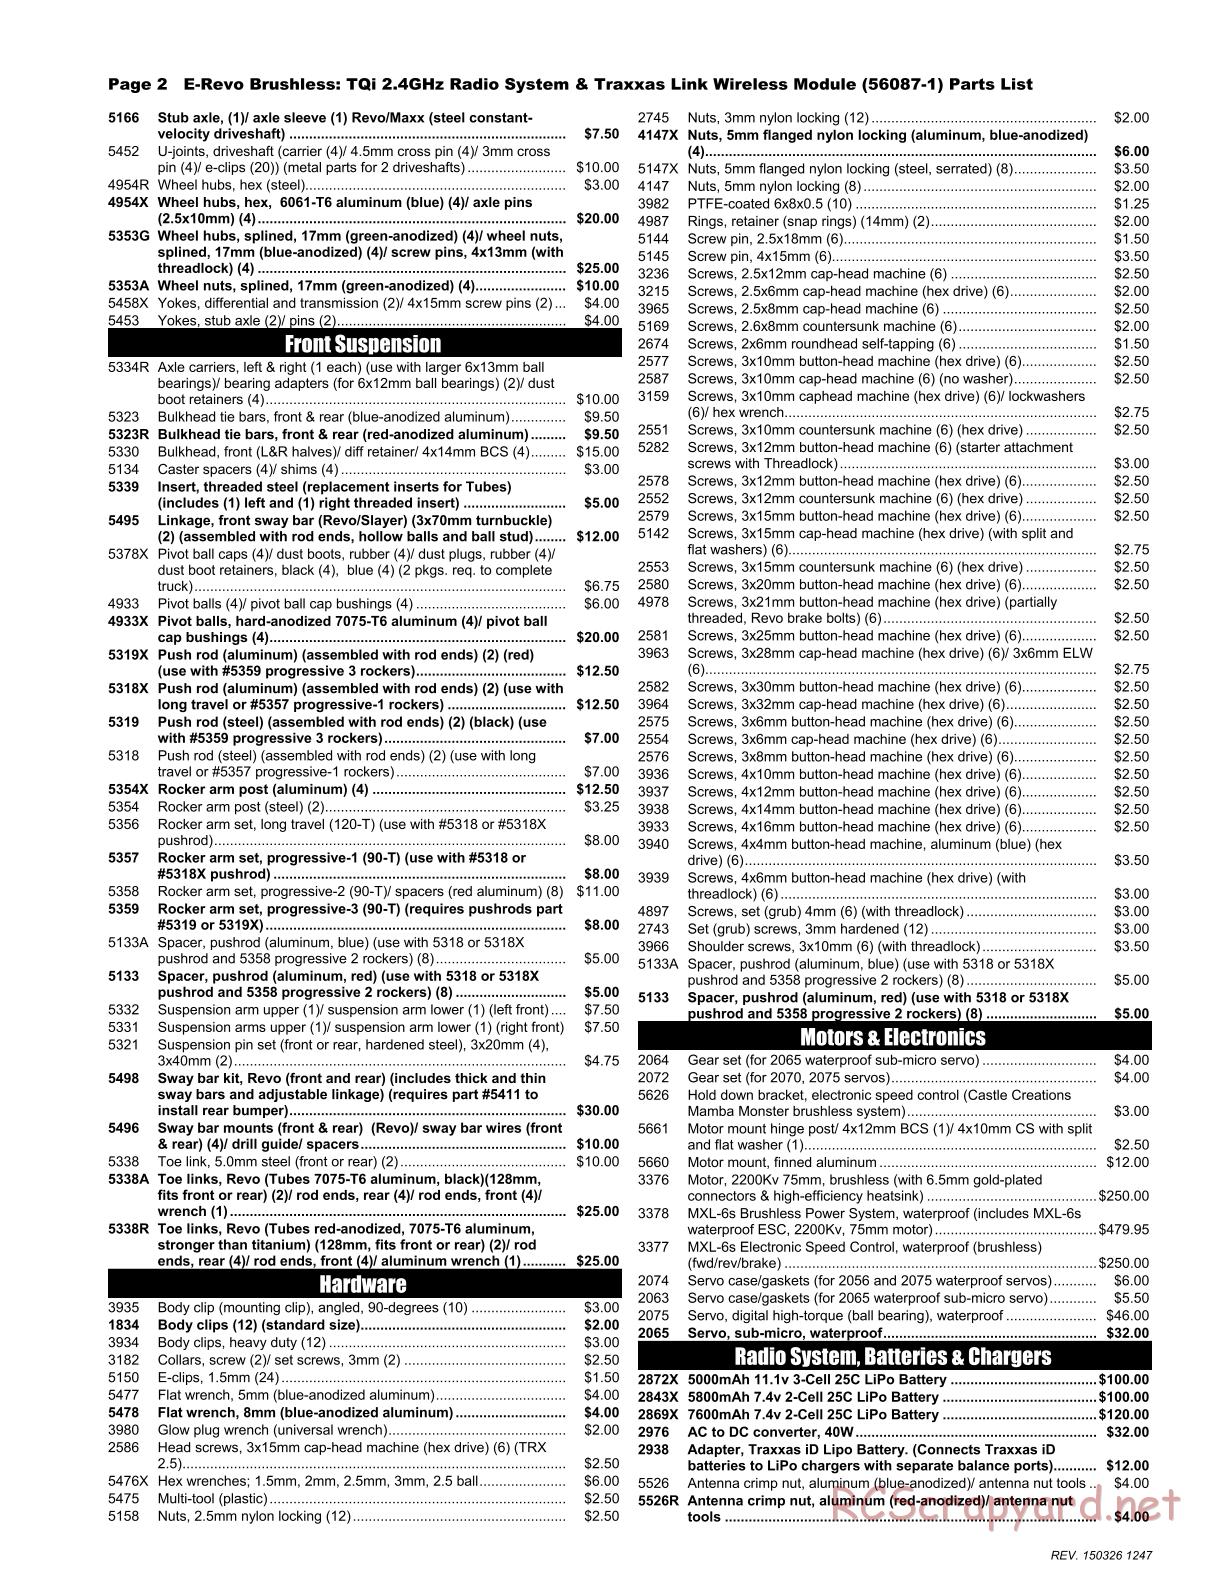 Traxxas - E-Revo Brushless (2015) - Parts List - Page 2